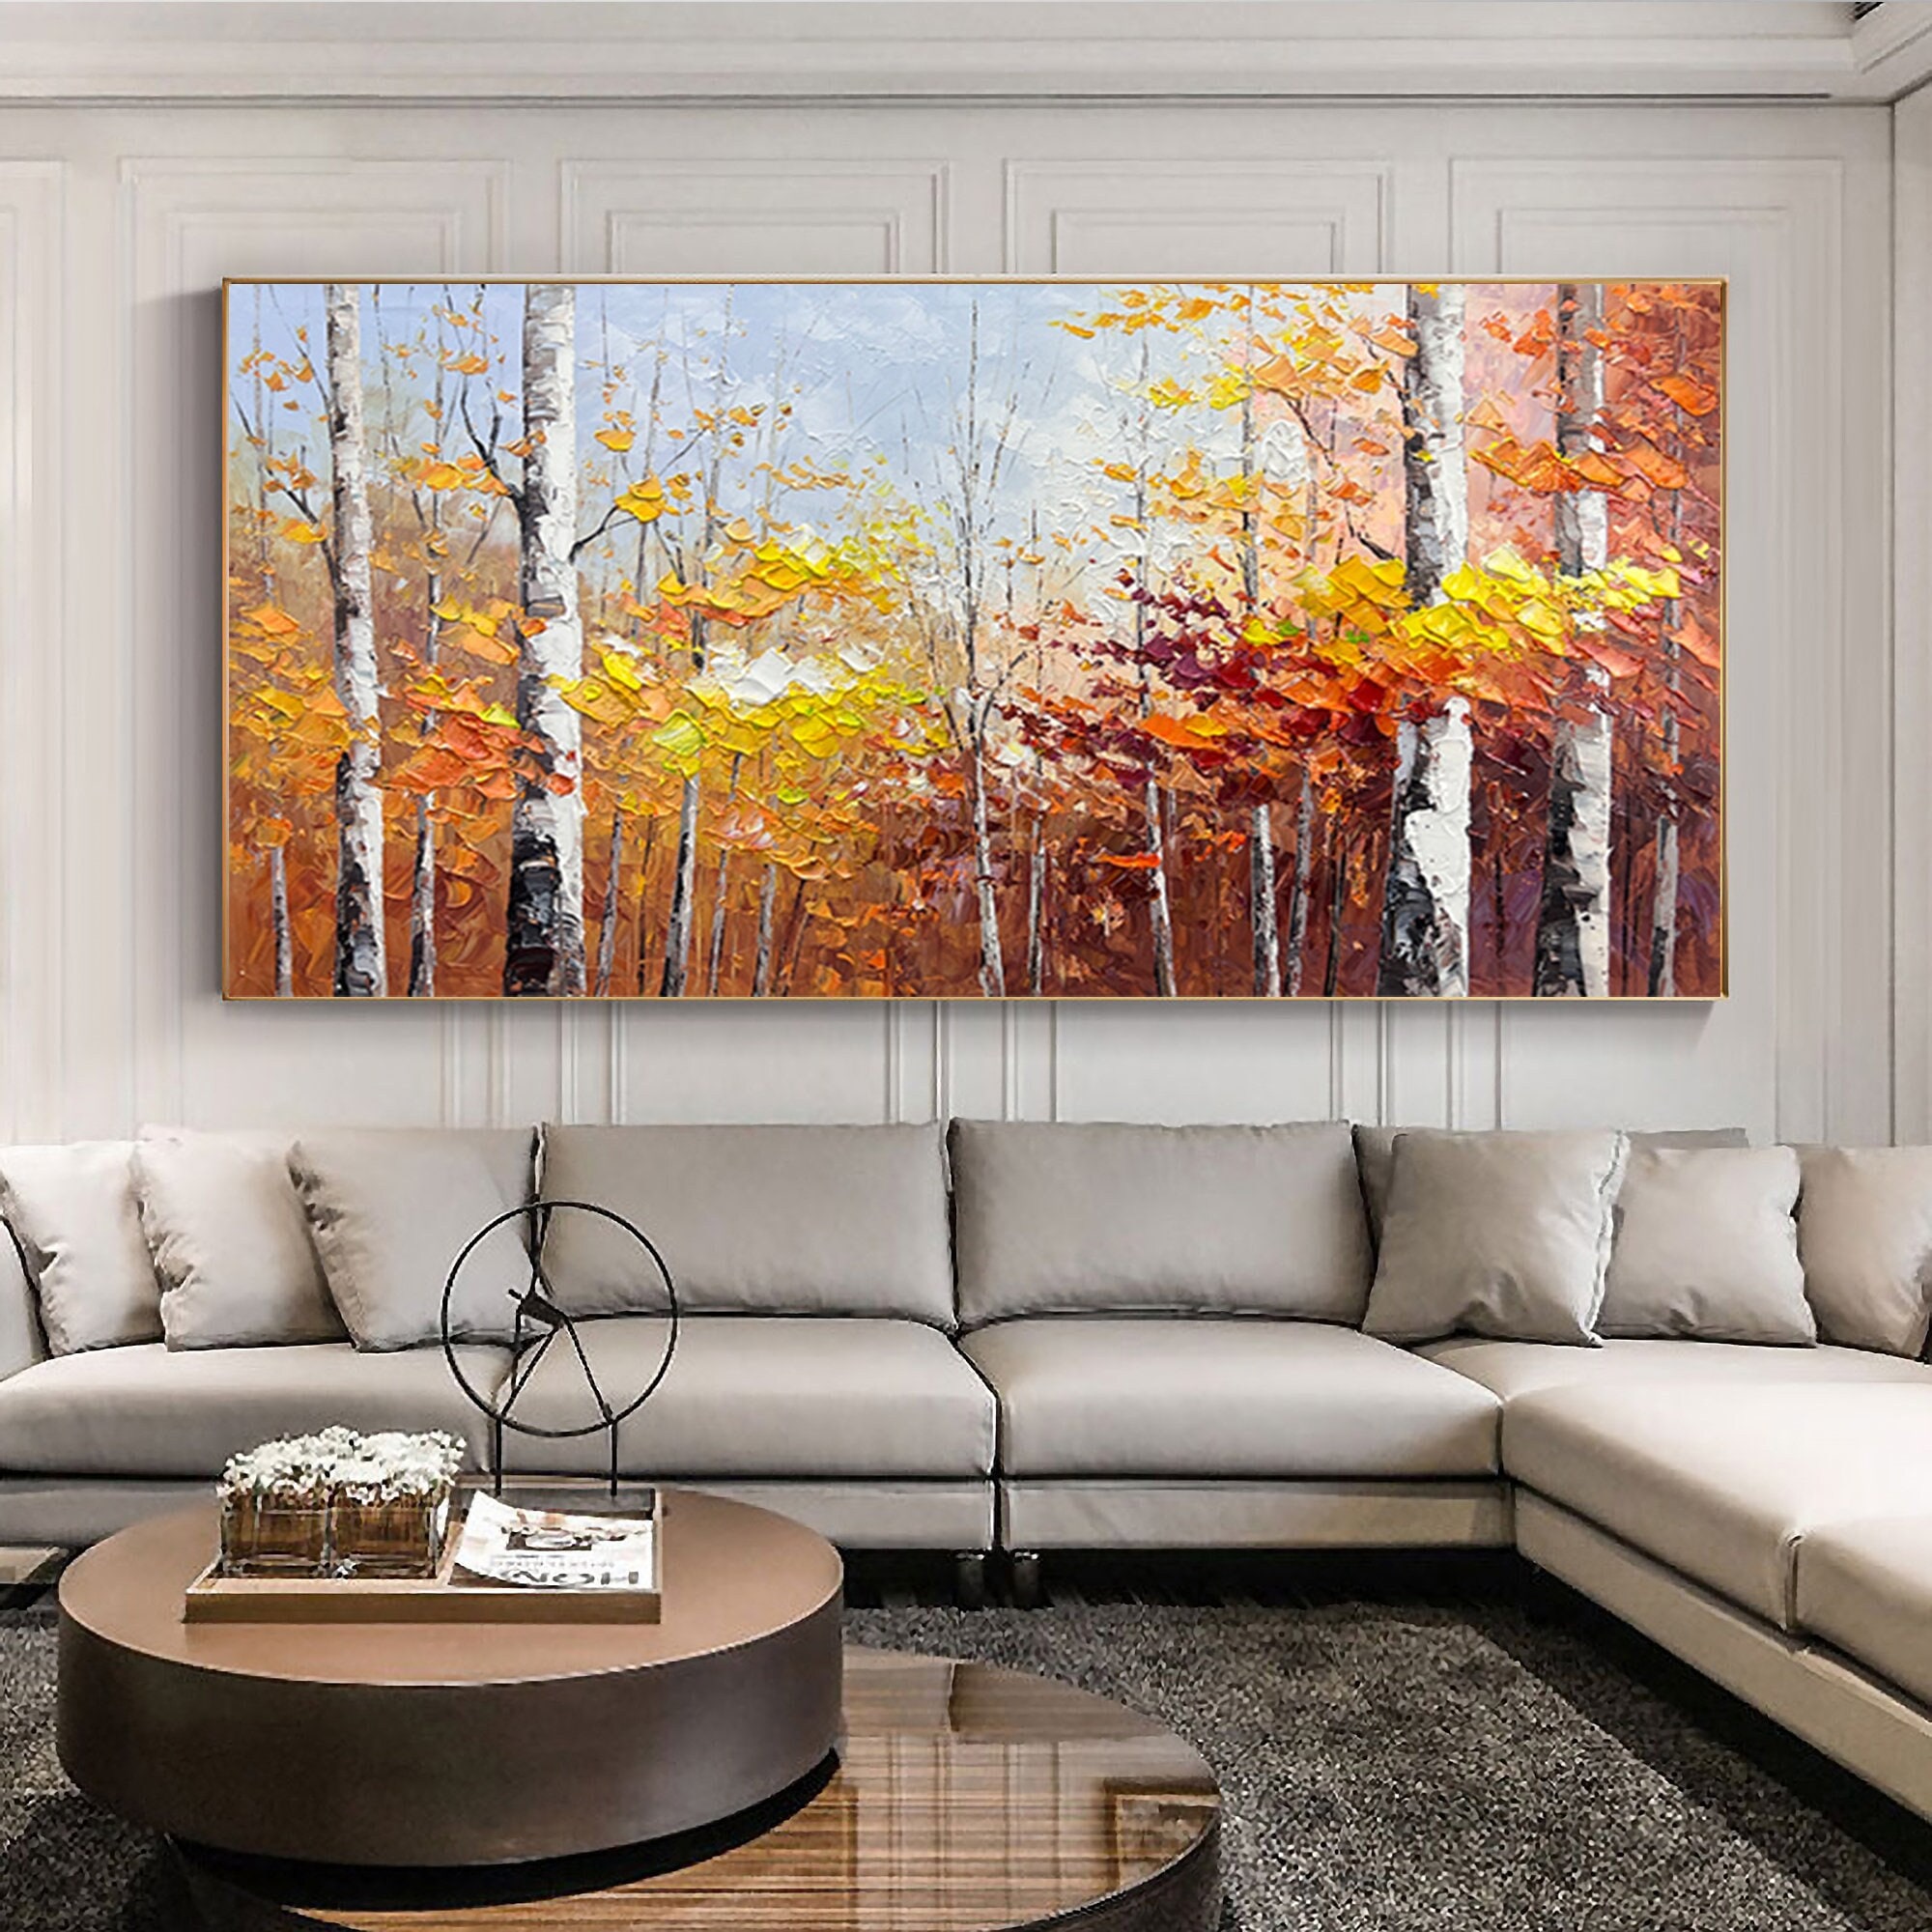 LB Autumn Maple Leaves Canvas Wall Art Fall Tree Forest Field Landcape  Painting Canvas Prints Artwork for Living Room Bedroom Bathroom Home Decor